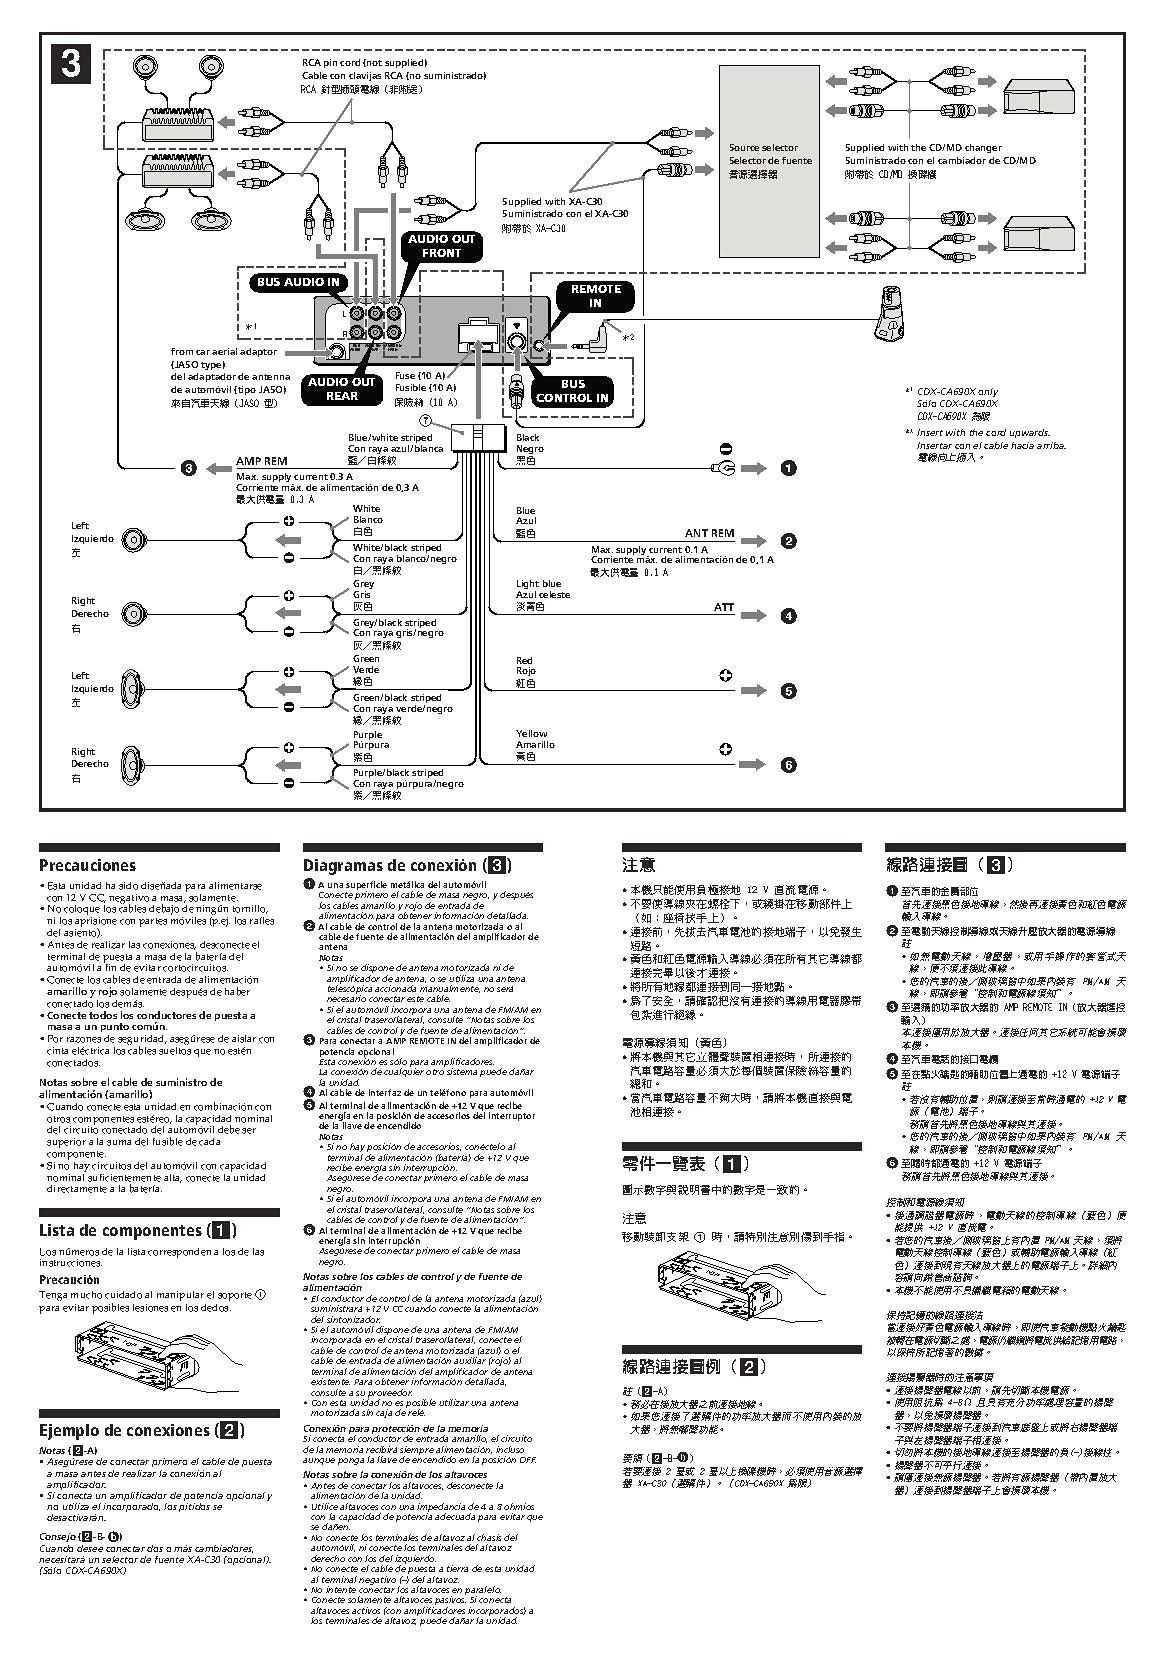 Jumper Cables Diagram Wiring Diagram Vga Cable Pinout Pdf Alexiustoday Throughout Hdmi Of Jumper Cables Diagram